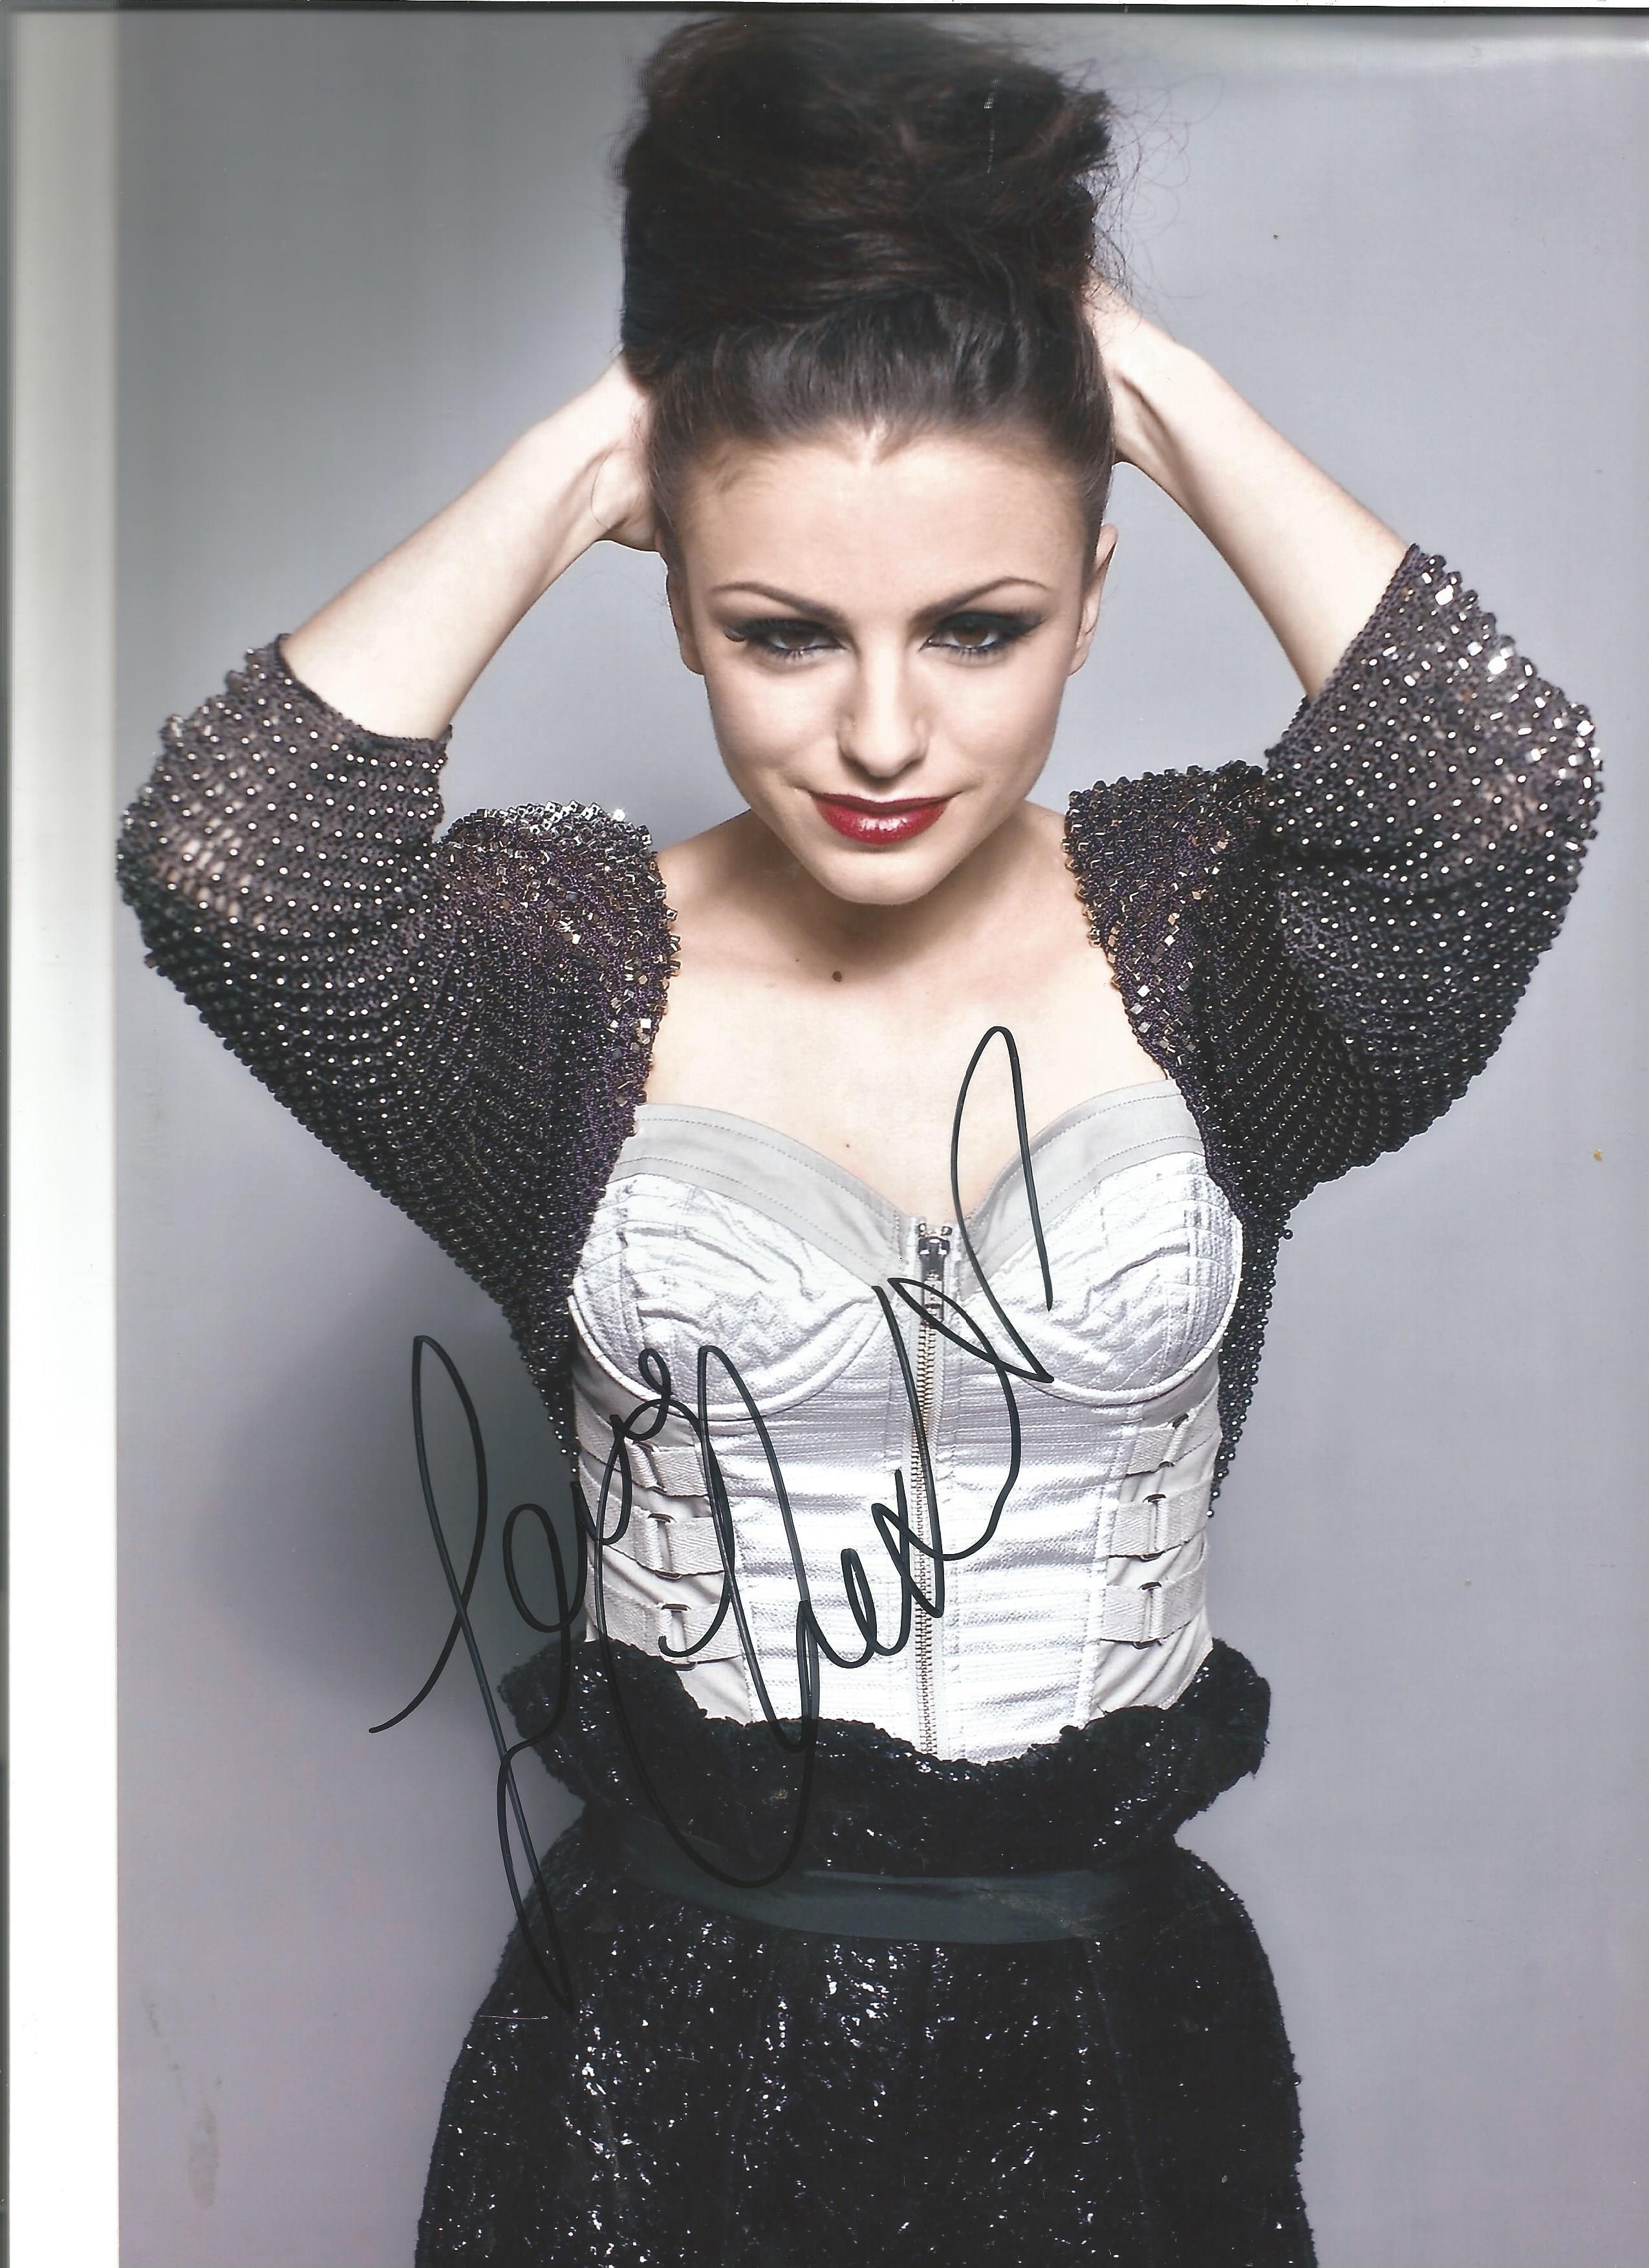 Music Cher Lloyd 12x8 signed colour photo. Cher Lloyd is an English singer, songwriter, and model.